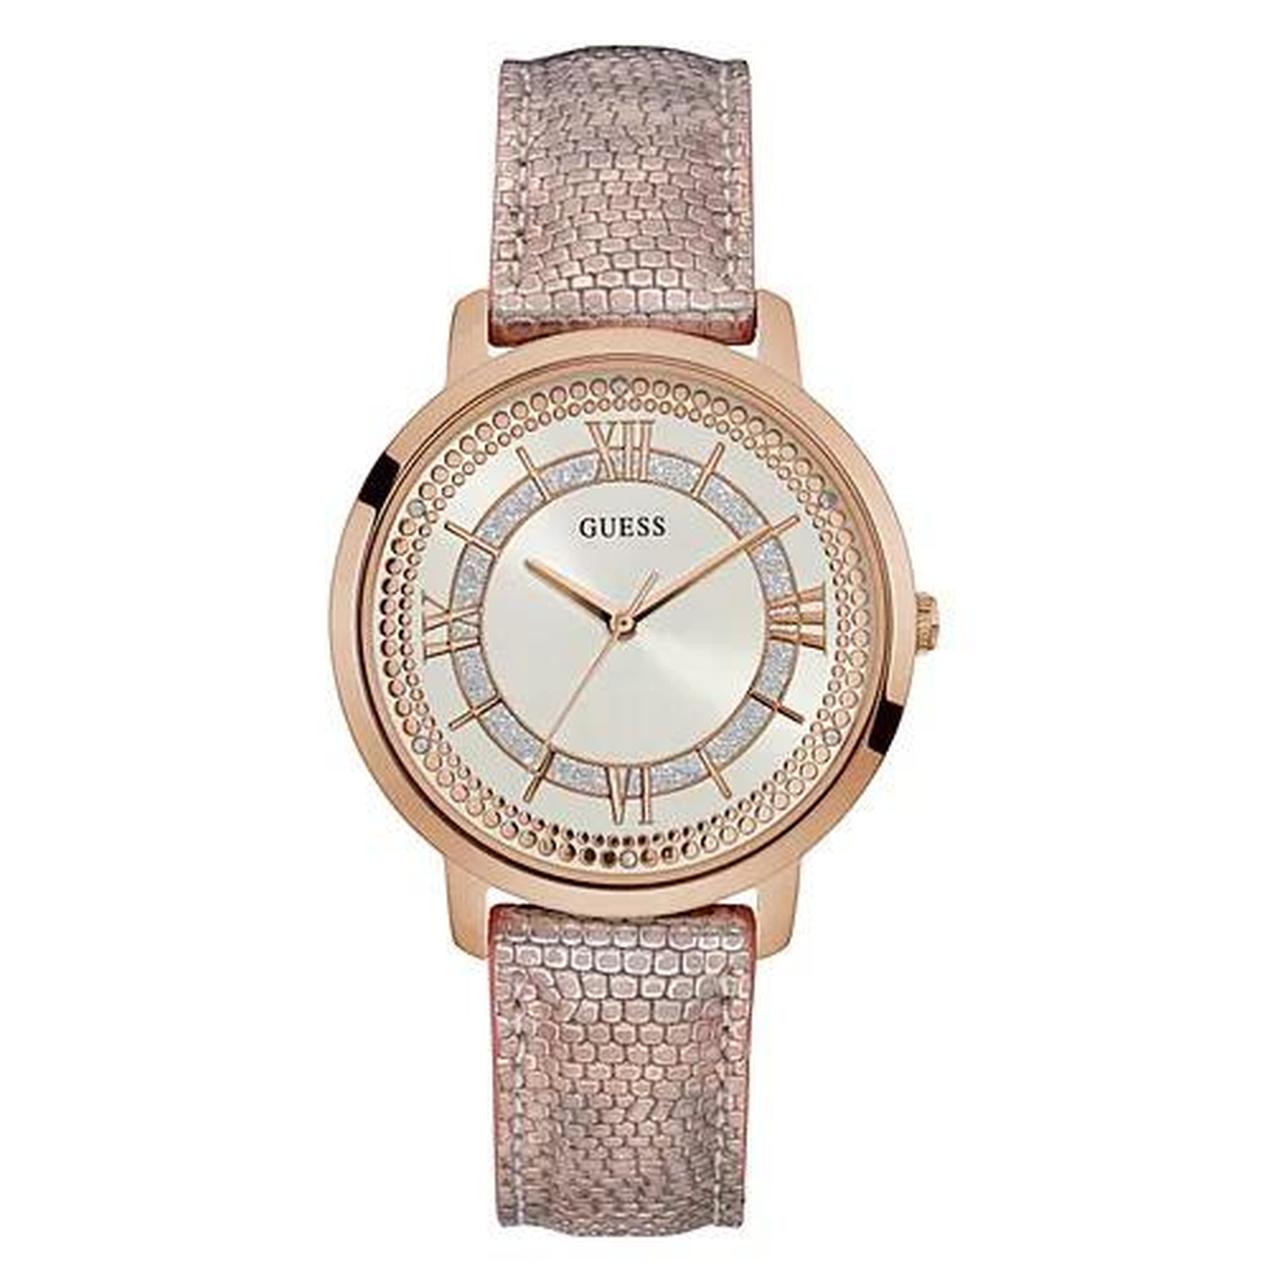 Product Image 1 - Guess ladies watch 💘
super cute